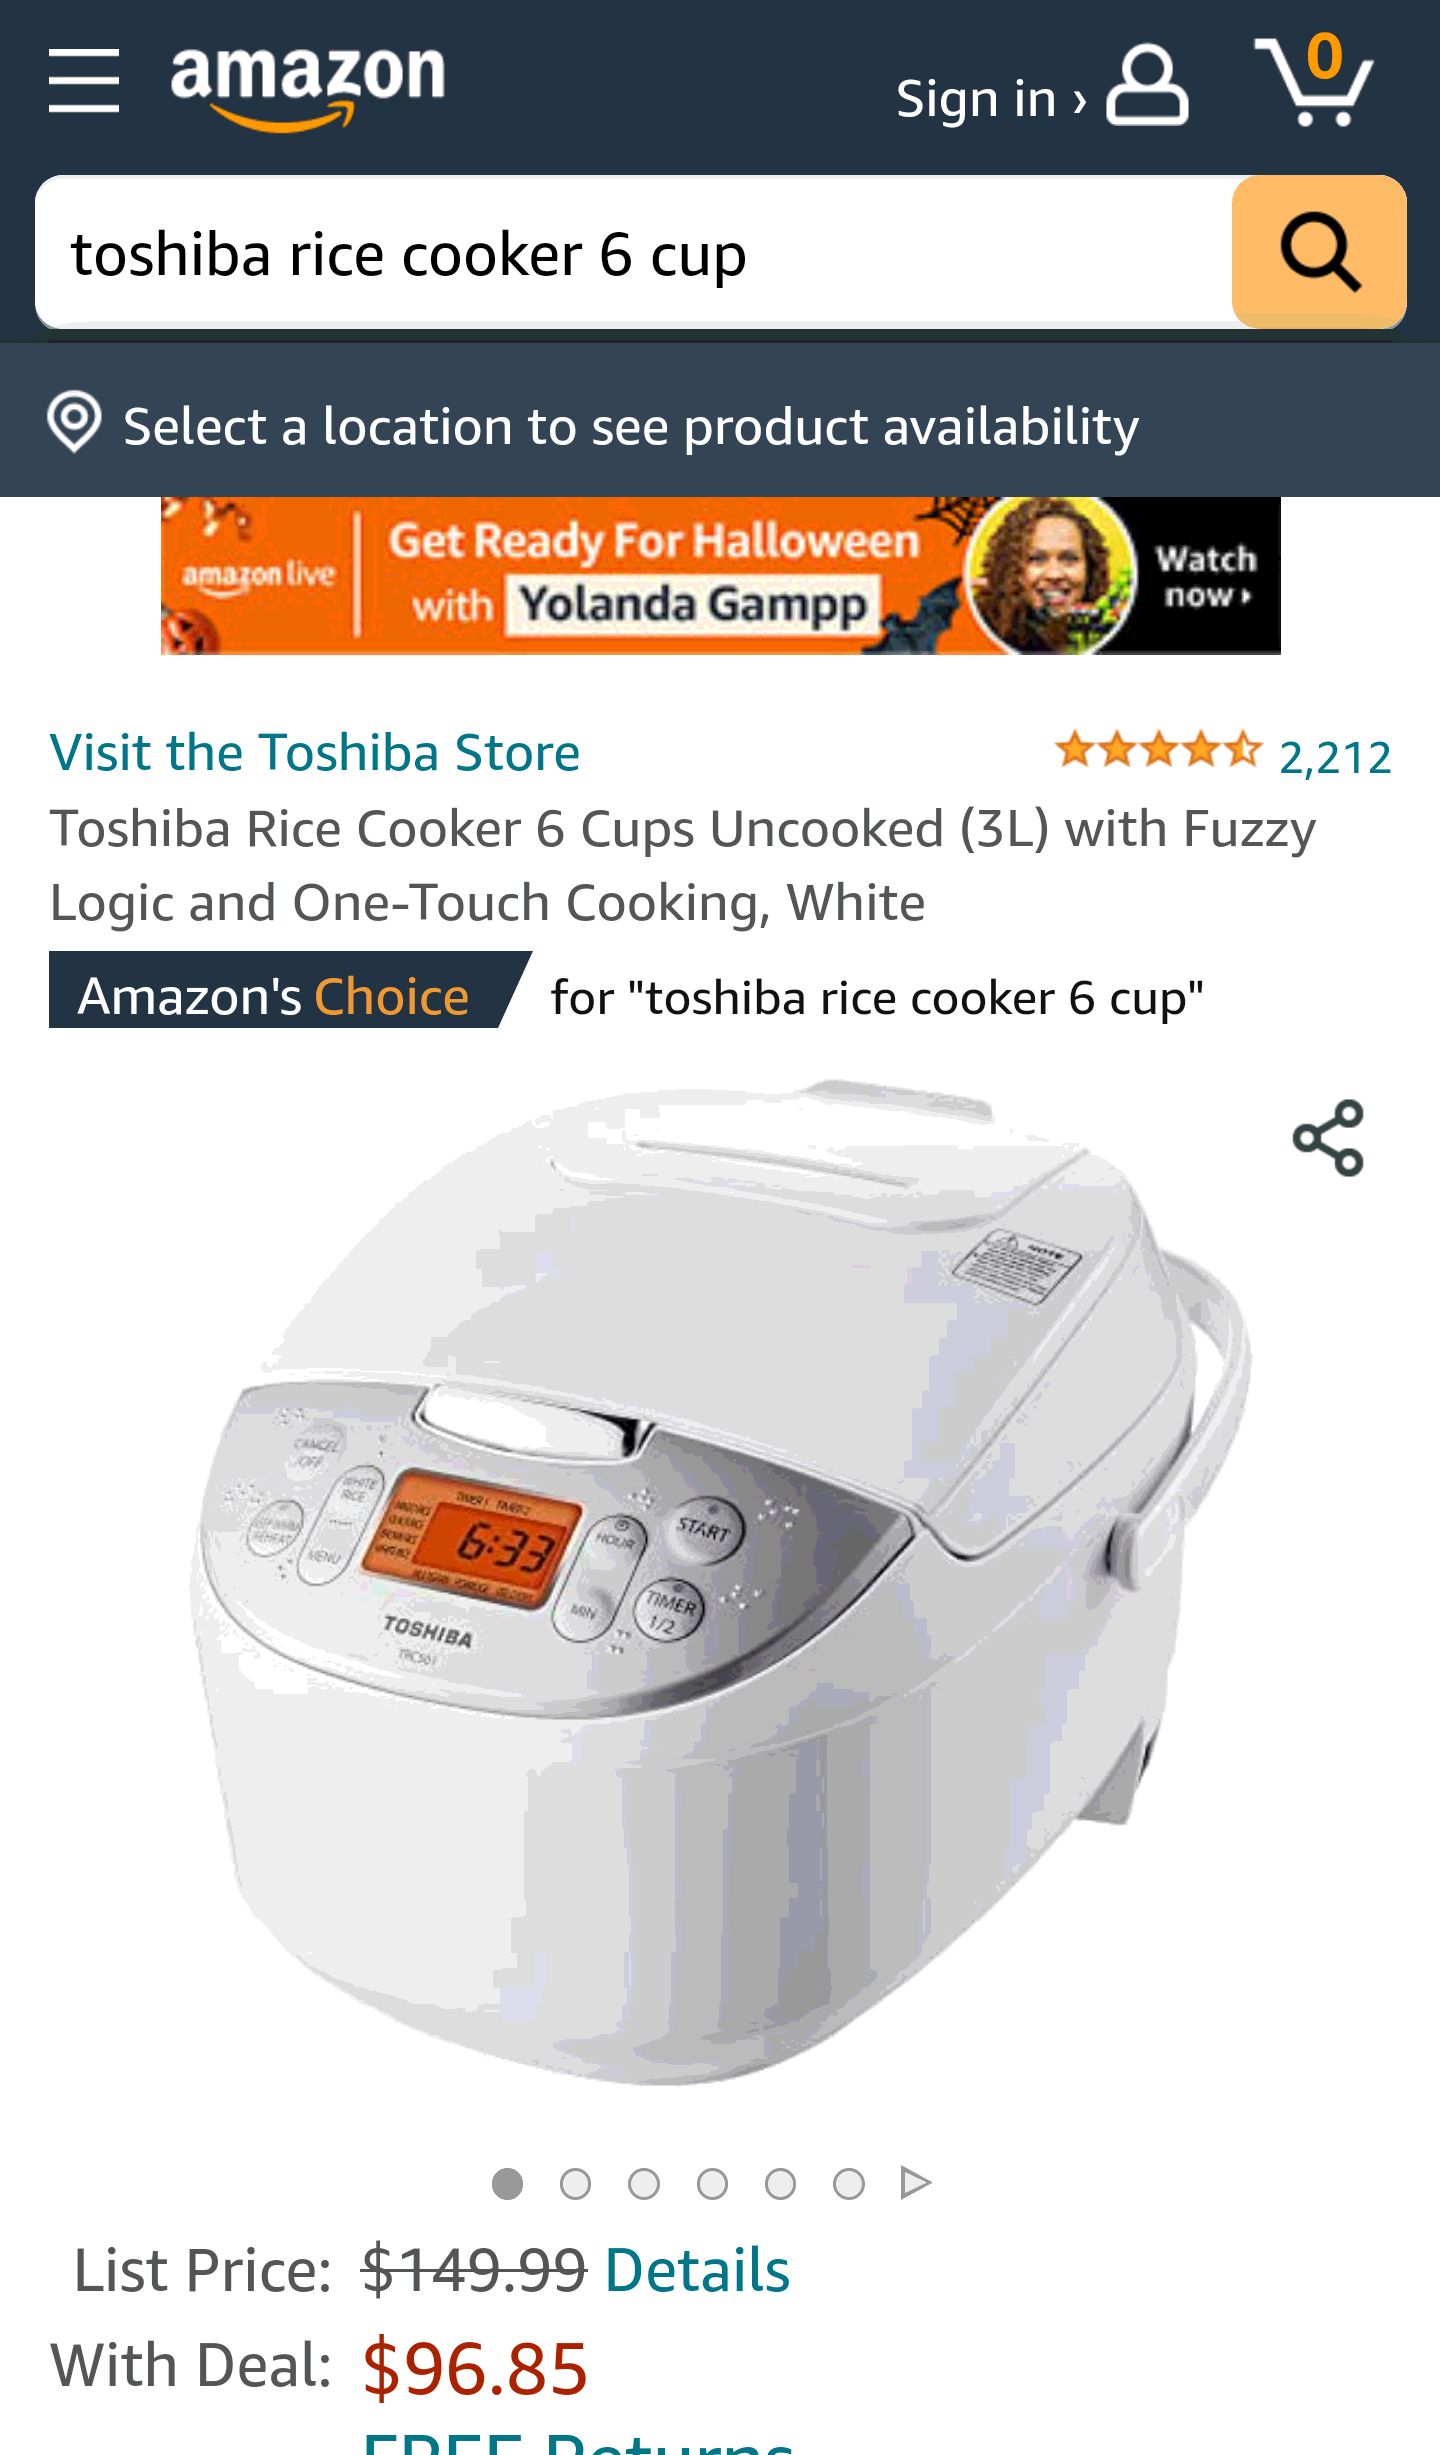 Toshiba Rice Cooker 6 Cups Uncooked (3L) with Fuzzy Logic and One-Touch Cooking, White: Home & Kitchen